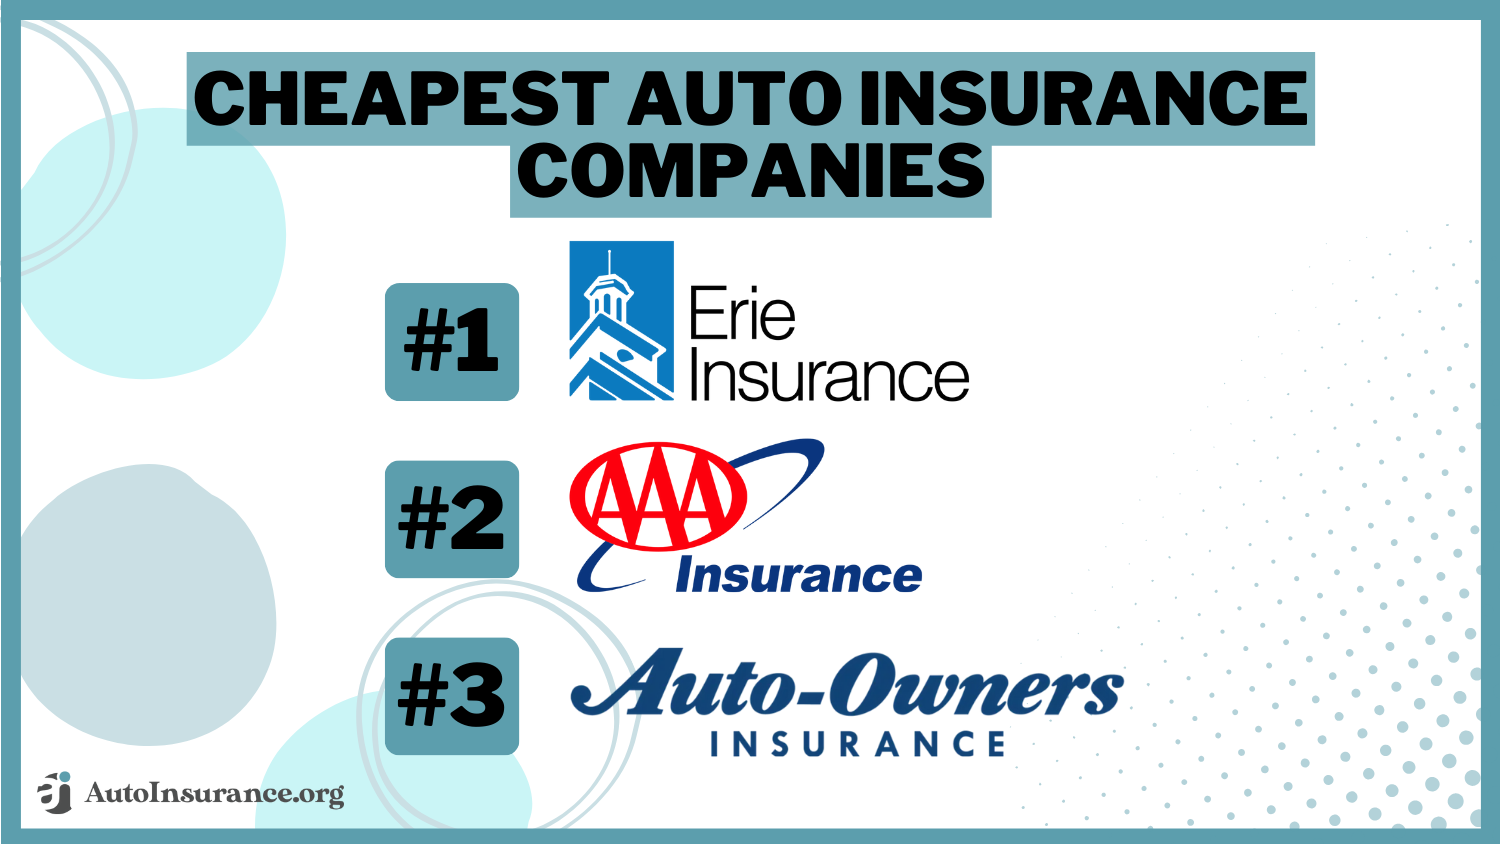 Erie, AAA, Auto-Owners: Cheapest Auto Insurance Companies